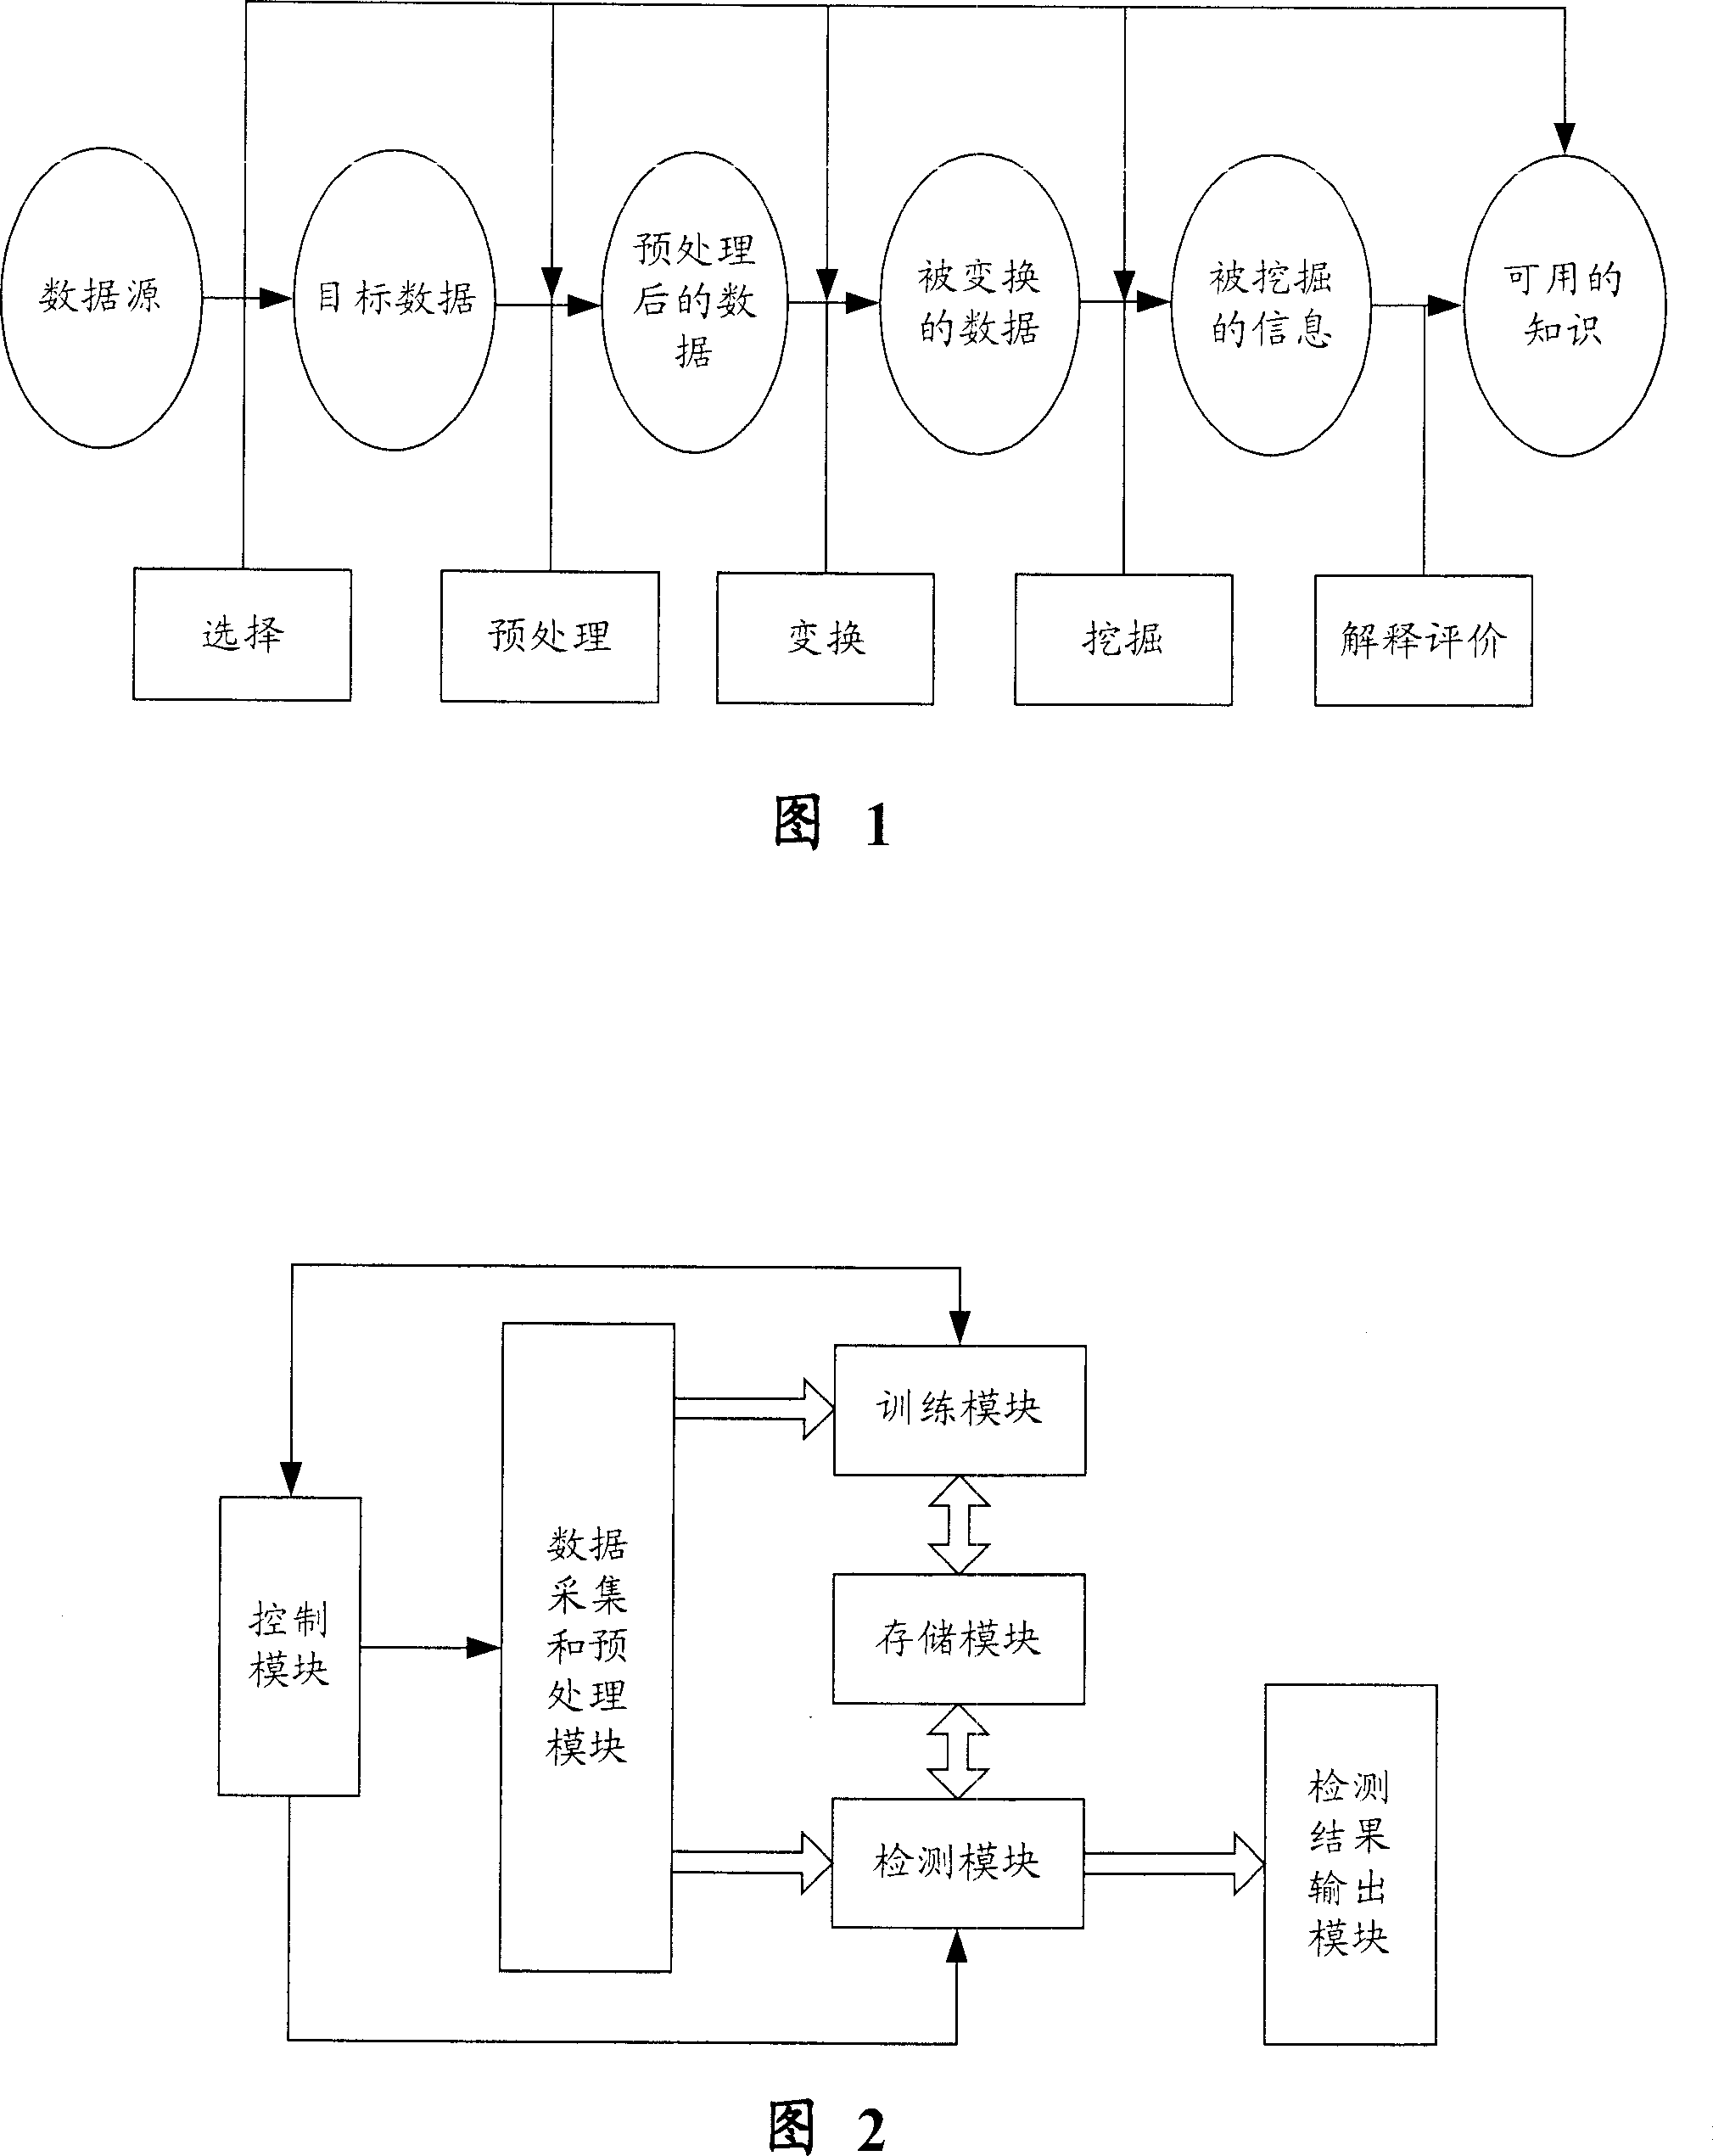 Program grade invasion detecting system and method based on sequency mode evacuation